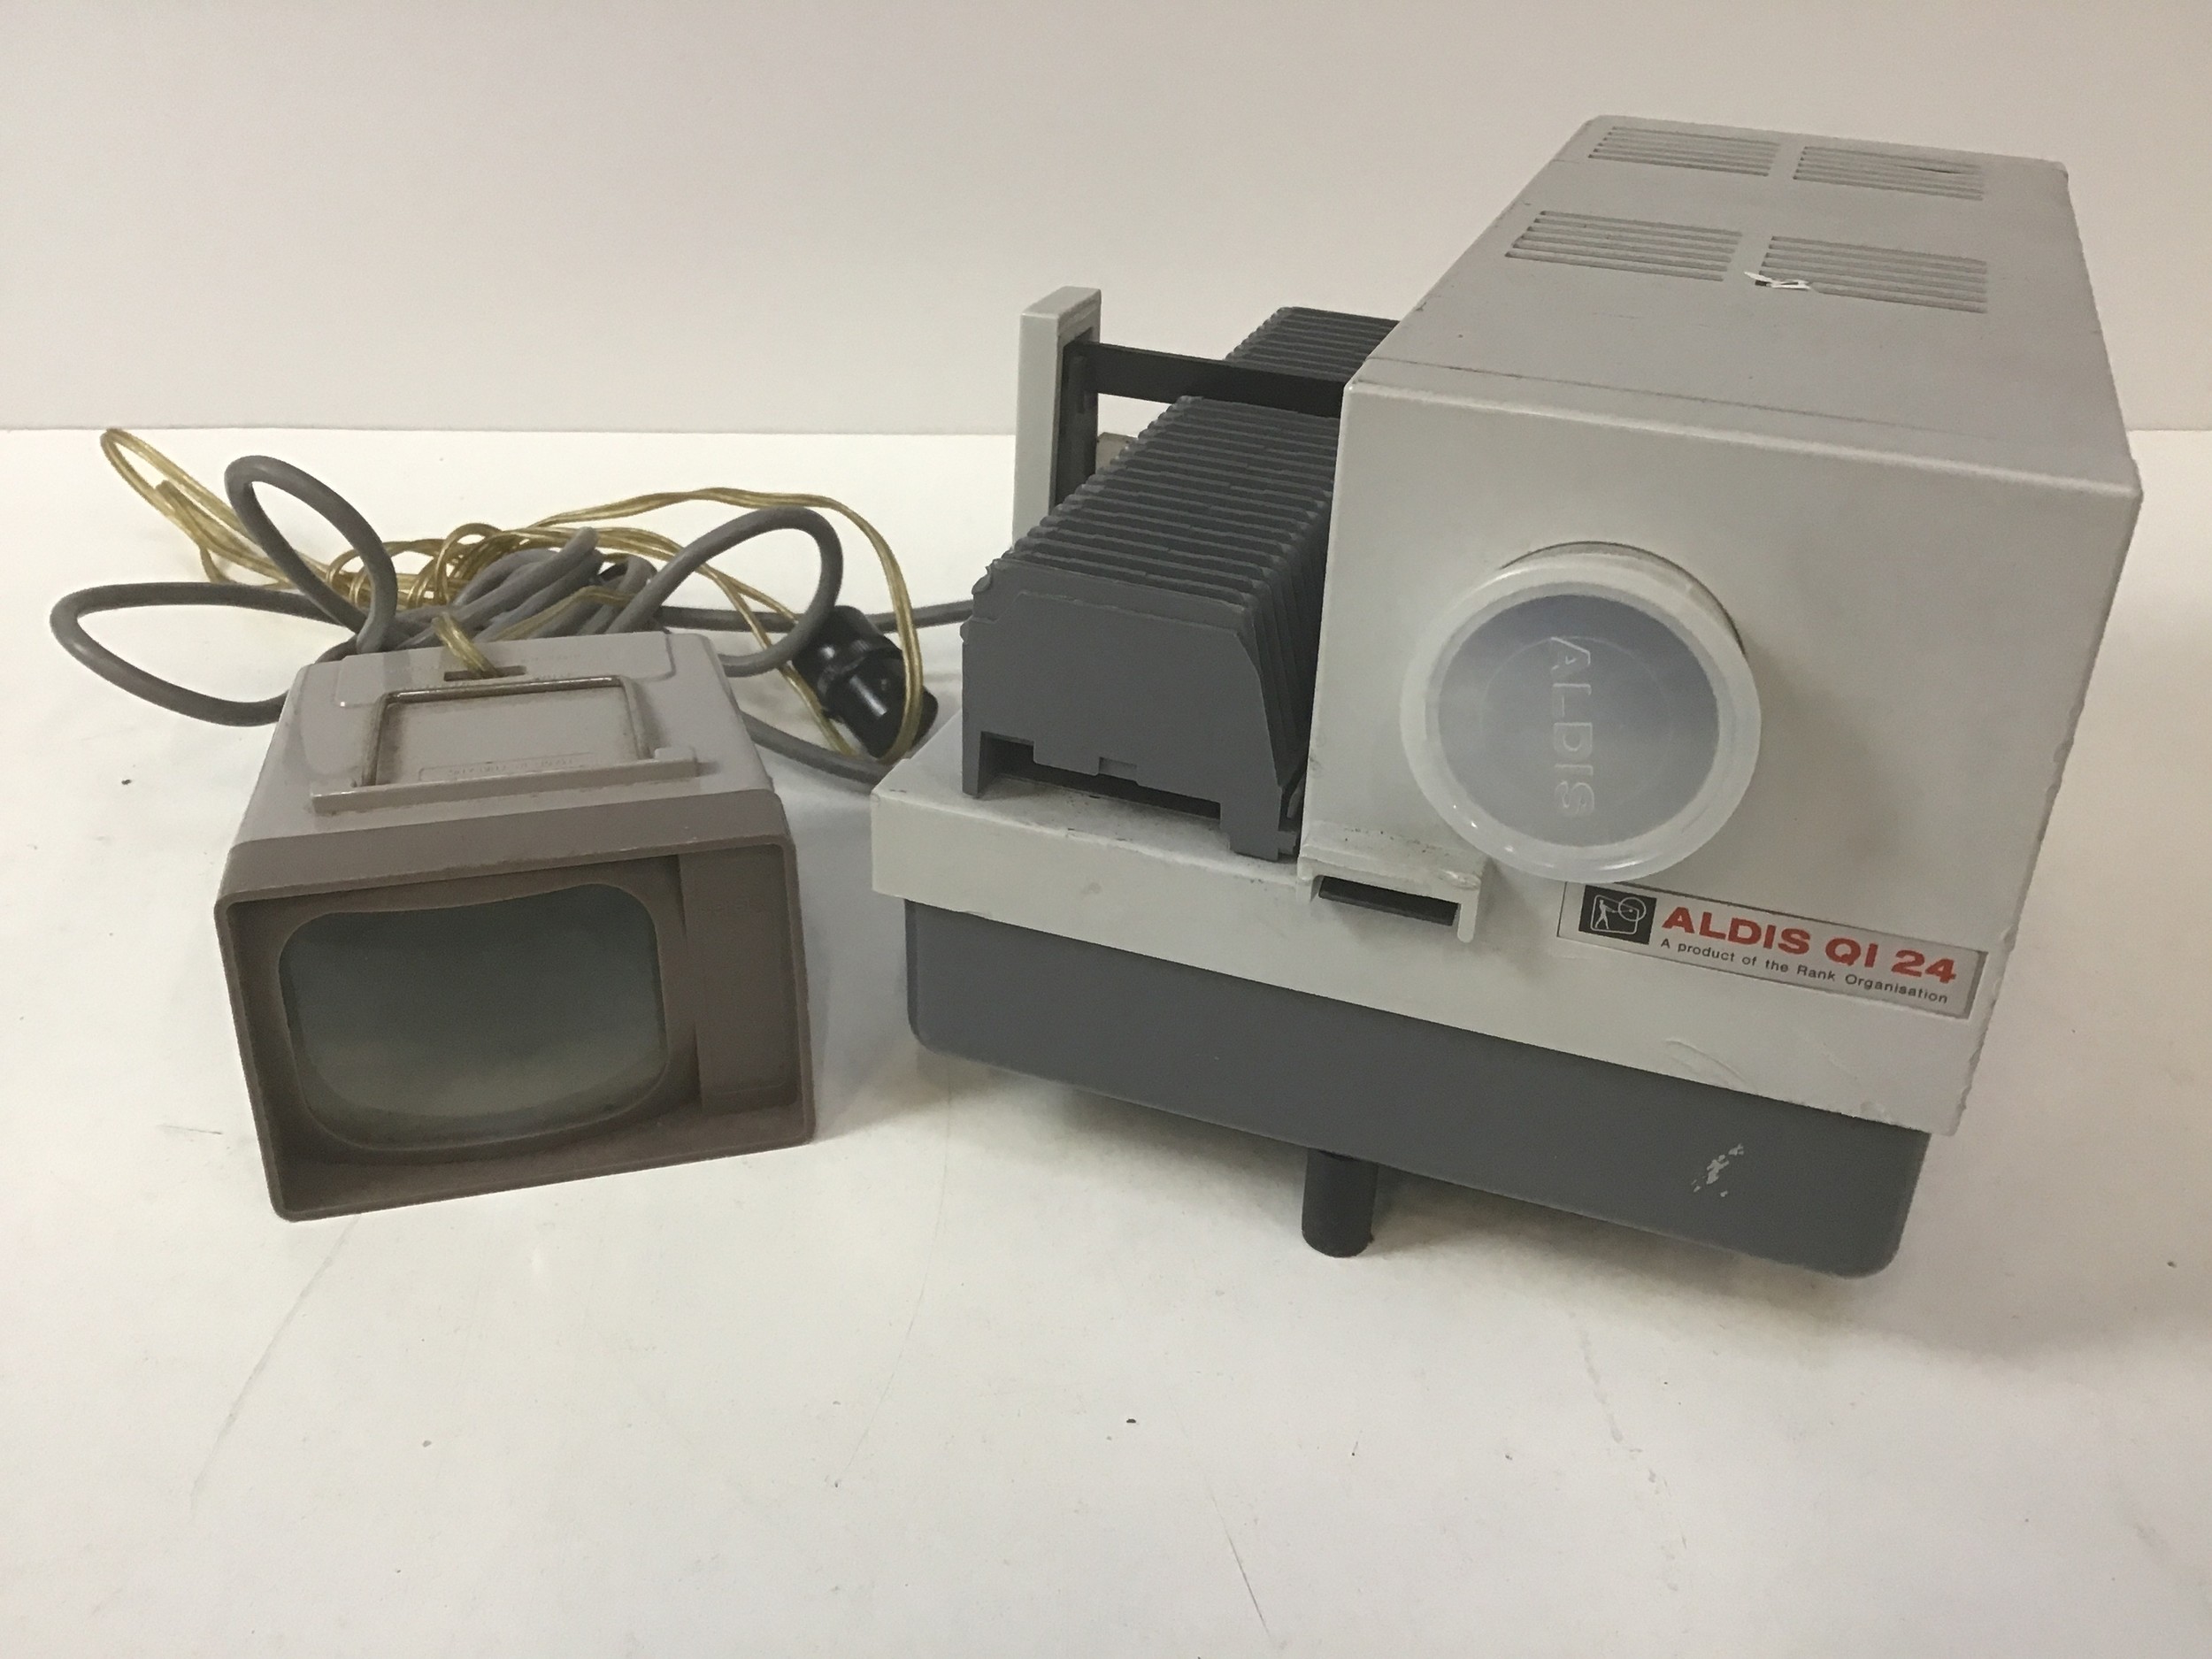 Slide Viewer and Aldis Projector